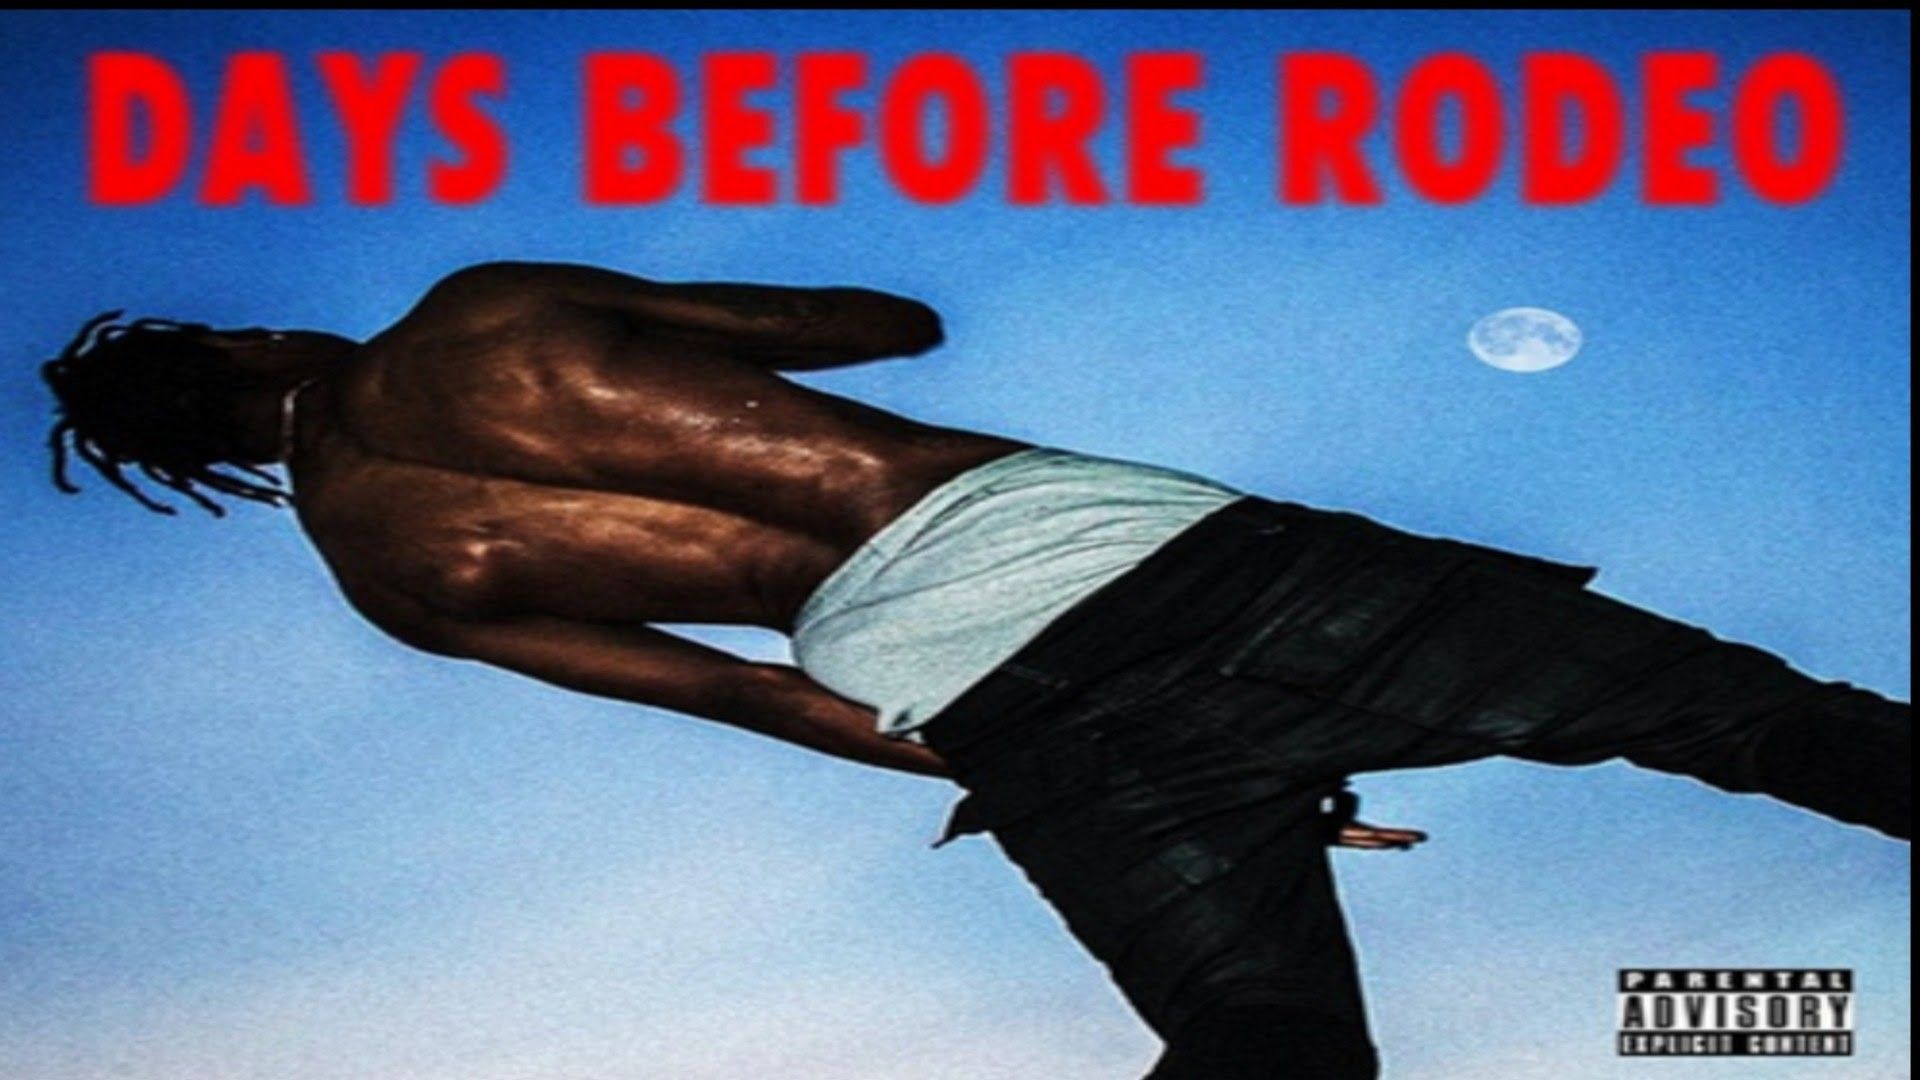 Days Before Rodeo Wallpaper Free Days Before Rodeo